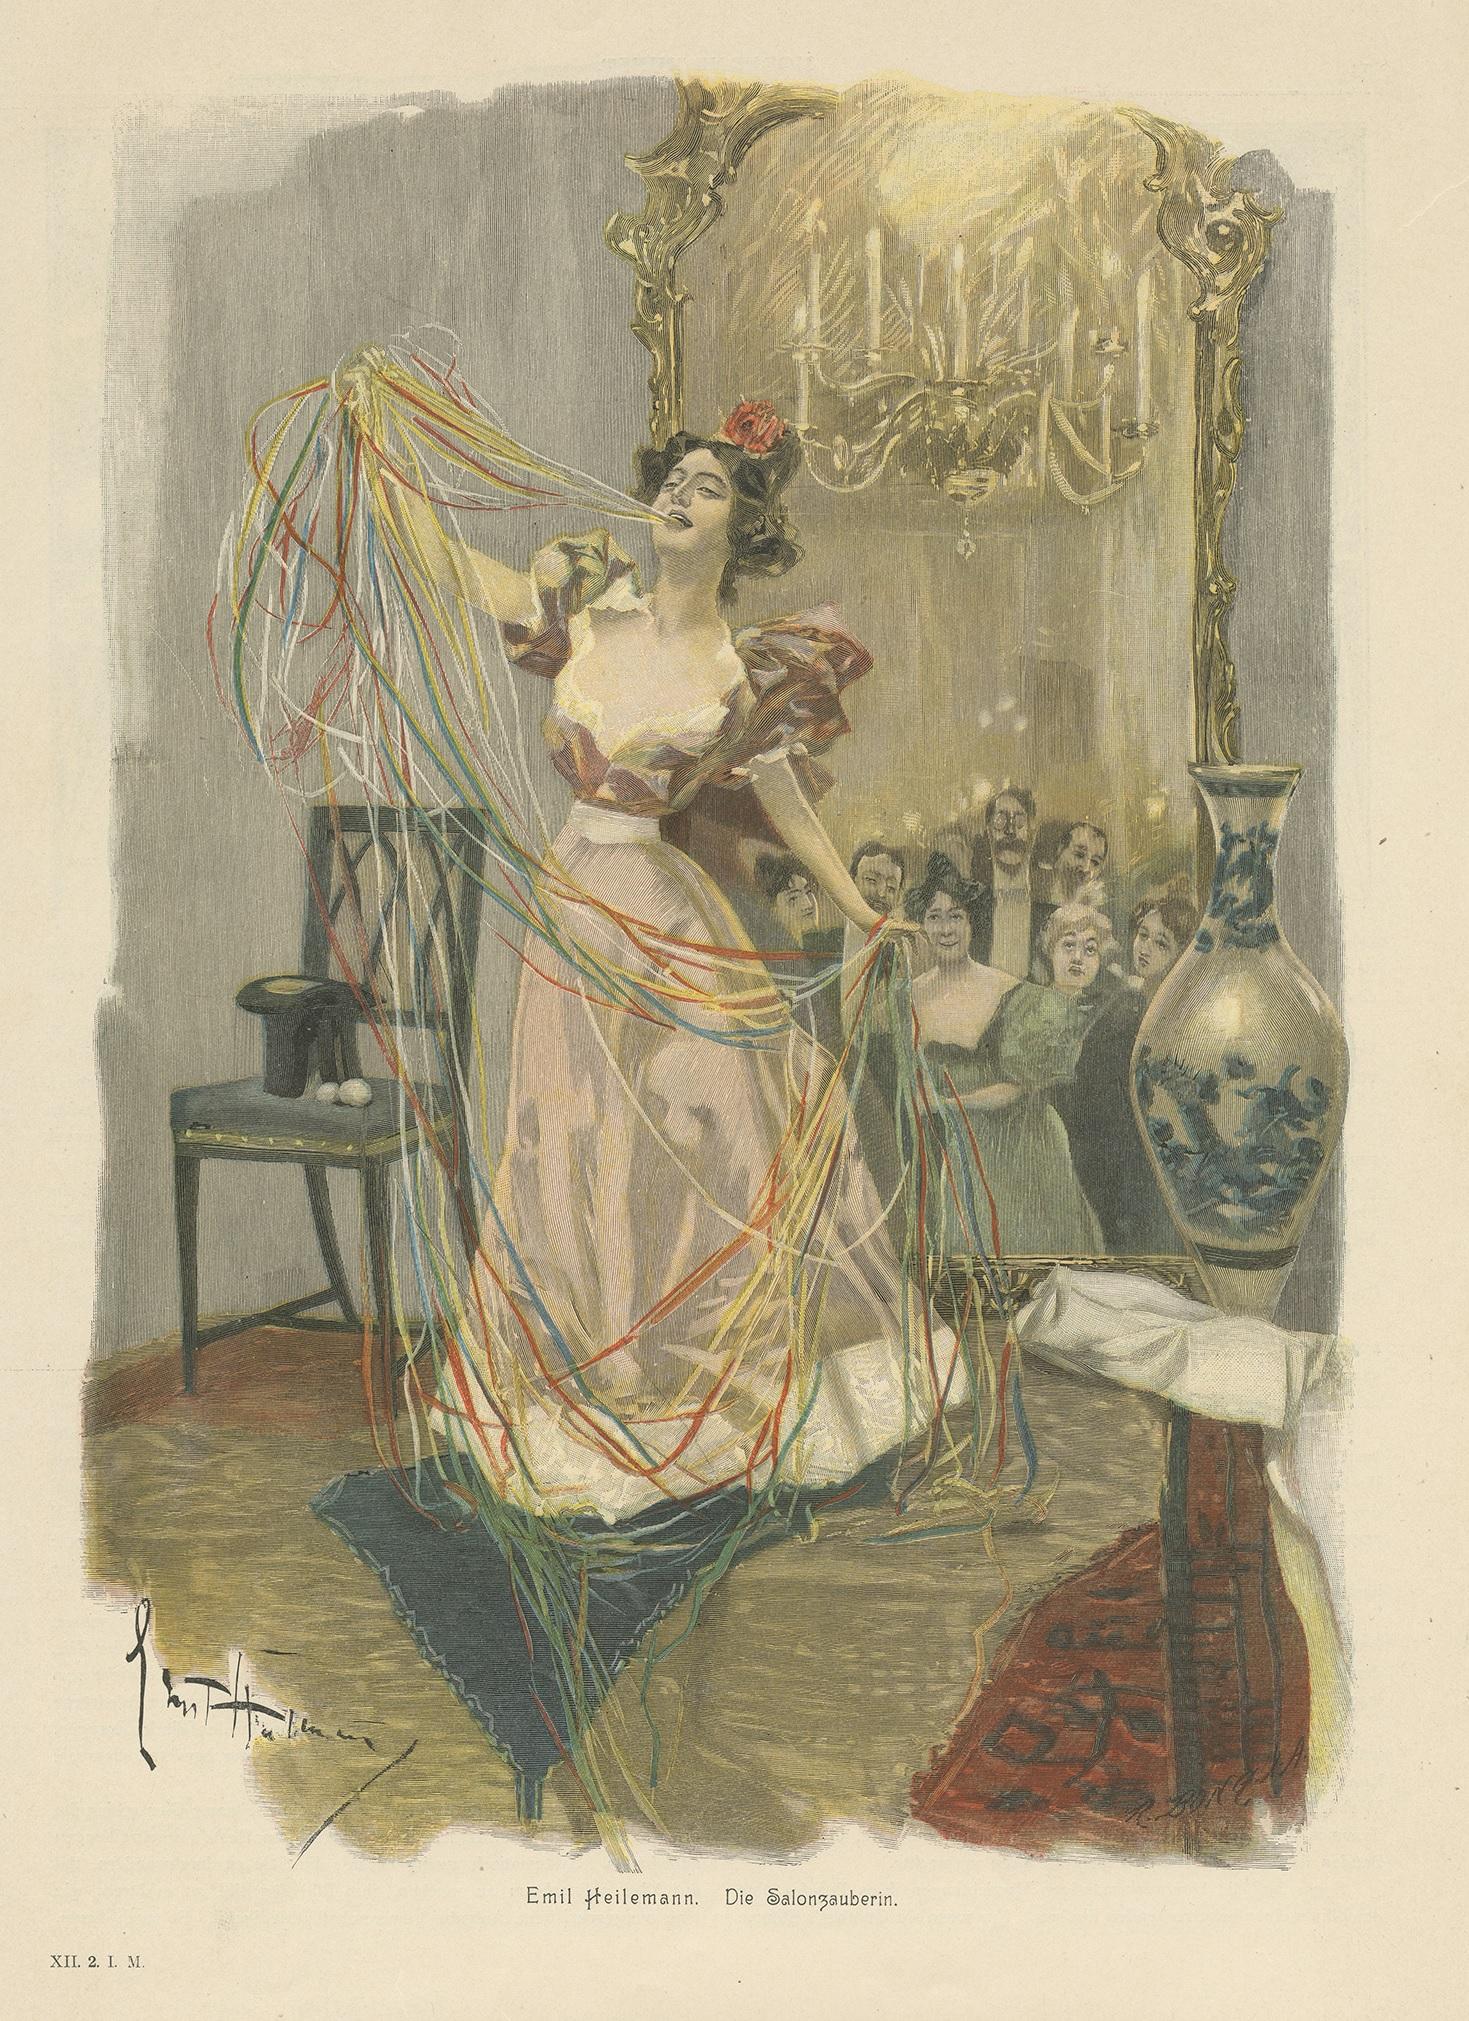 Antique print titled 'Emil Heilemann. Die Salonzauberin'. Made after Emil Heilemann. It shows a lady celebrating and dancing in a lounge.